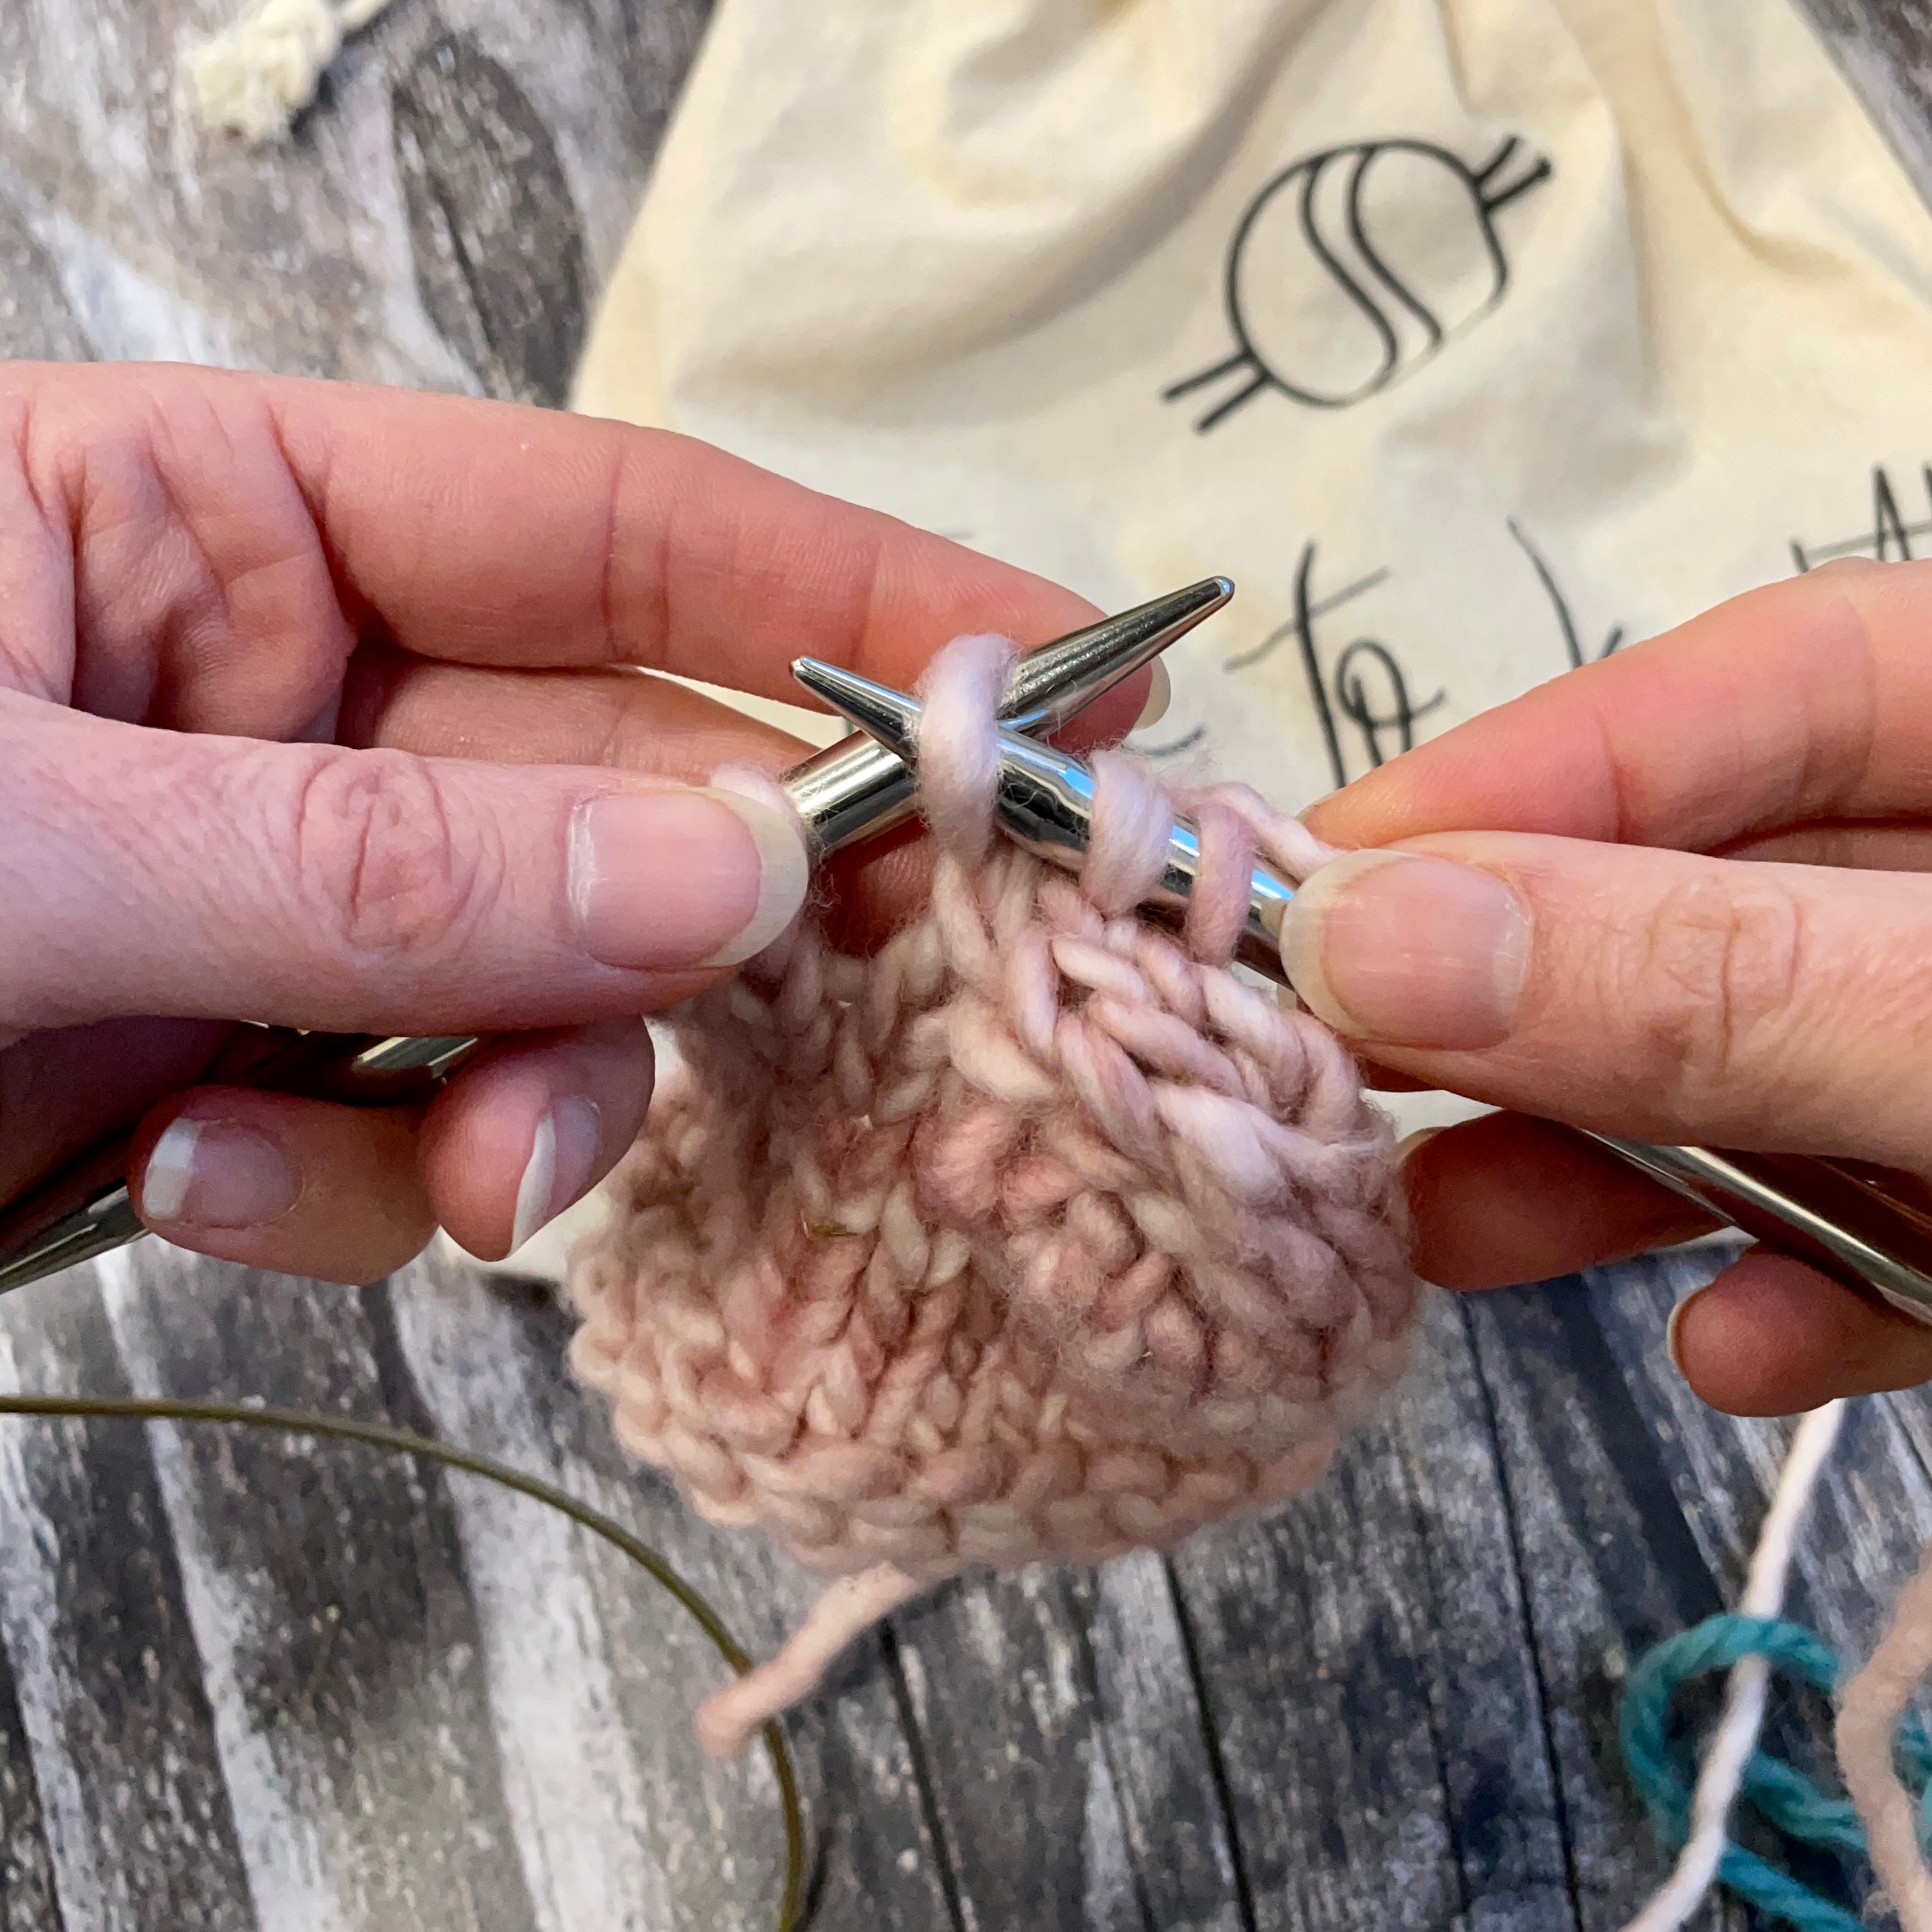 Learn to Knit: How to Work an I-Cord Bind-Off